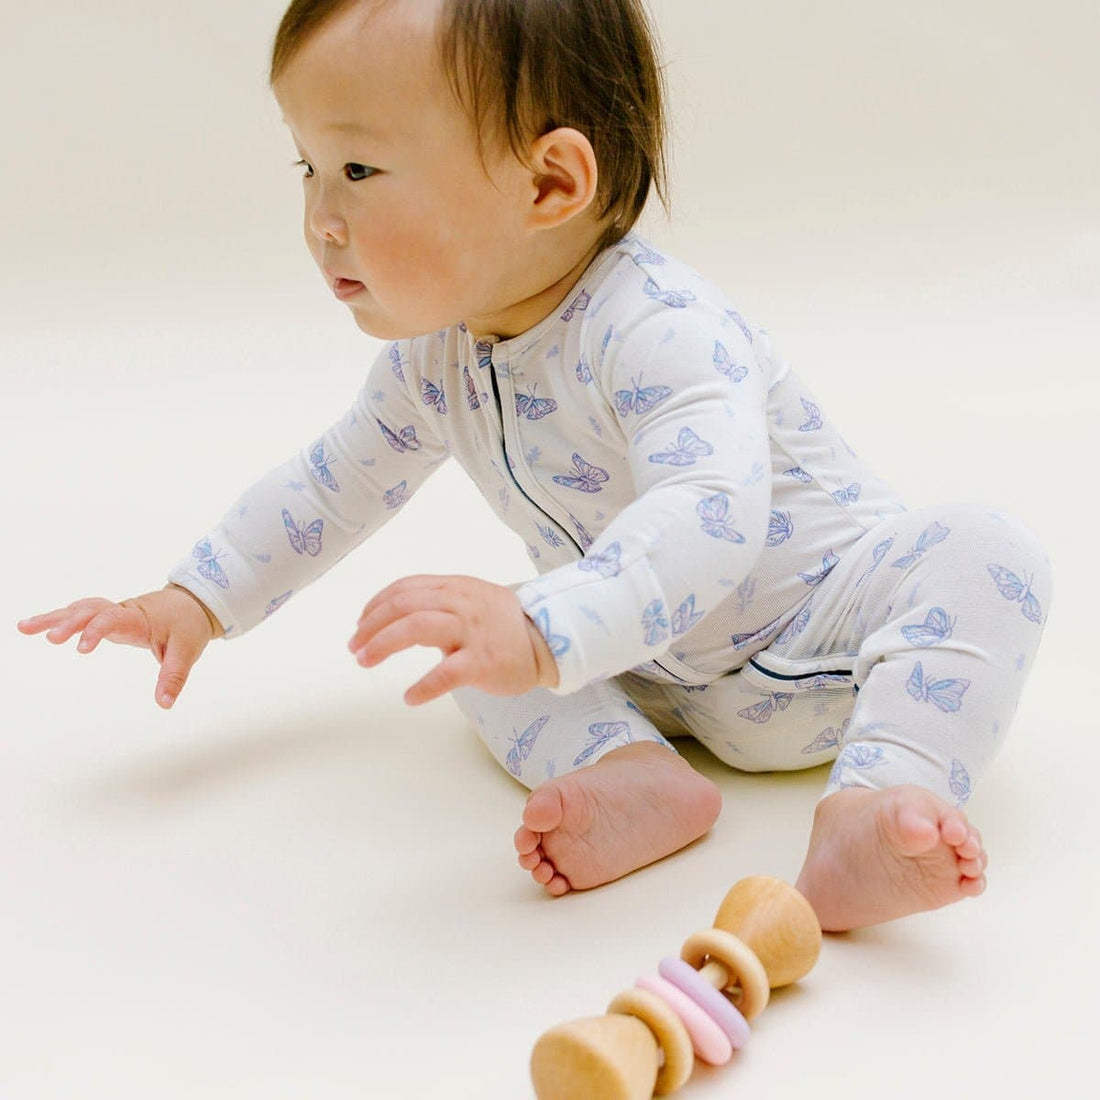 Whimsical Bundle - Bamboo Convertible Footie